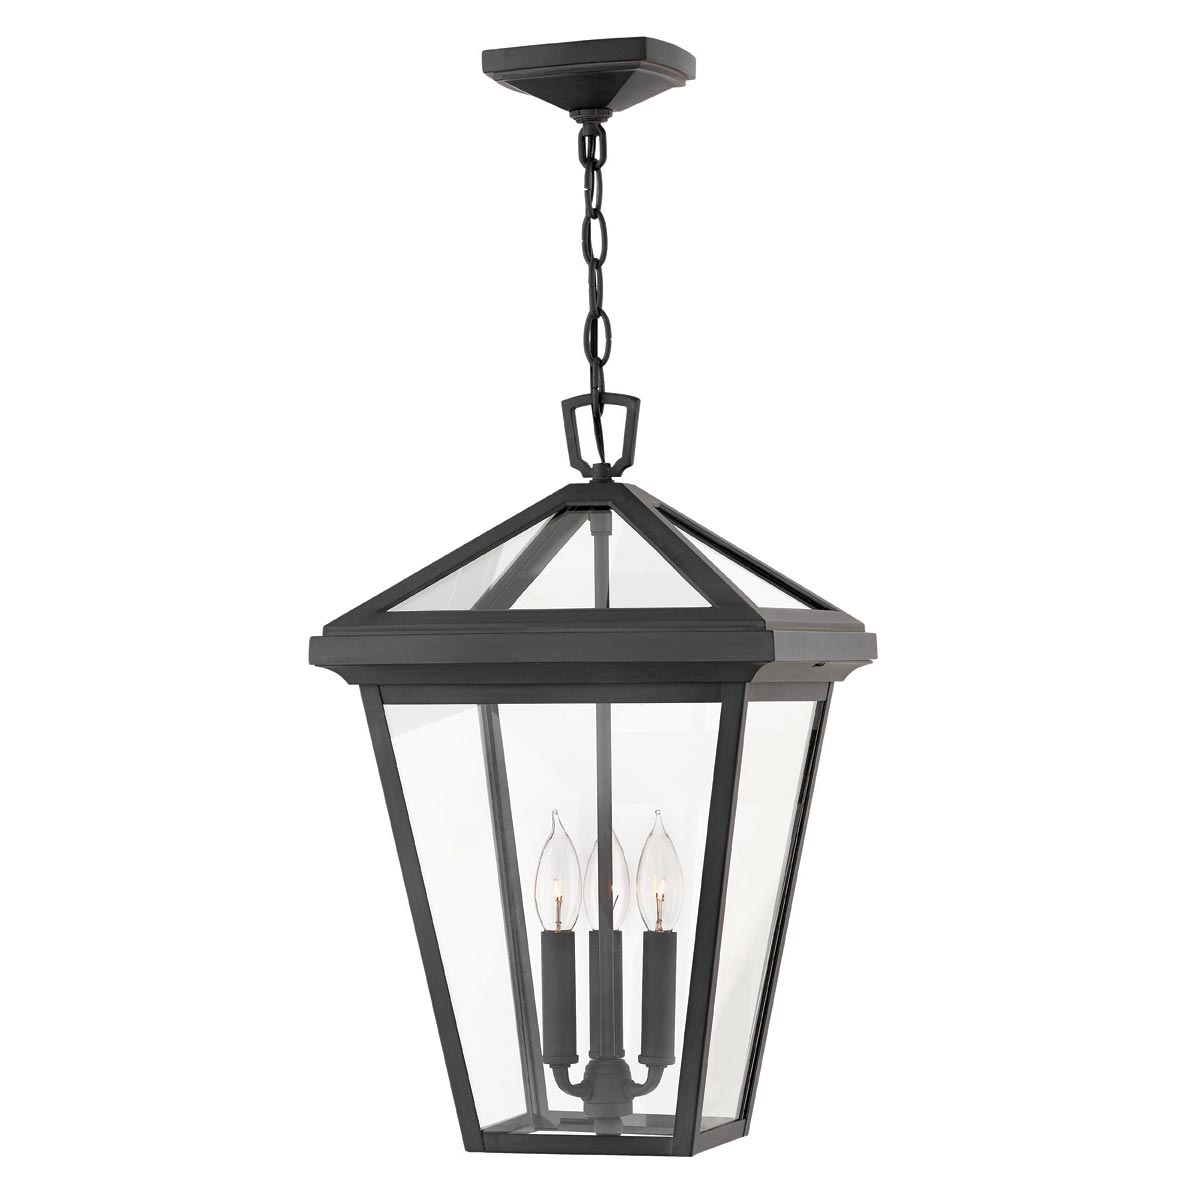 Quintiesse Alford Place Large 3 Light Outdoor Porch Chain Lantern Black